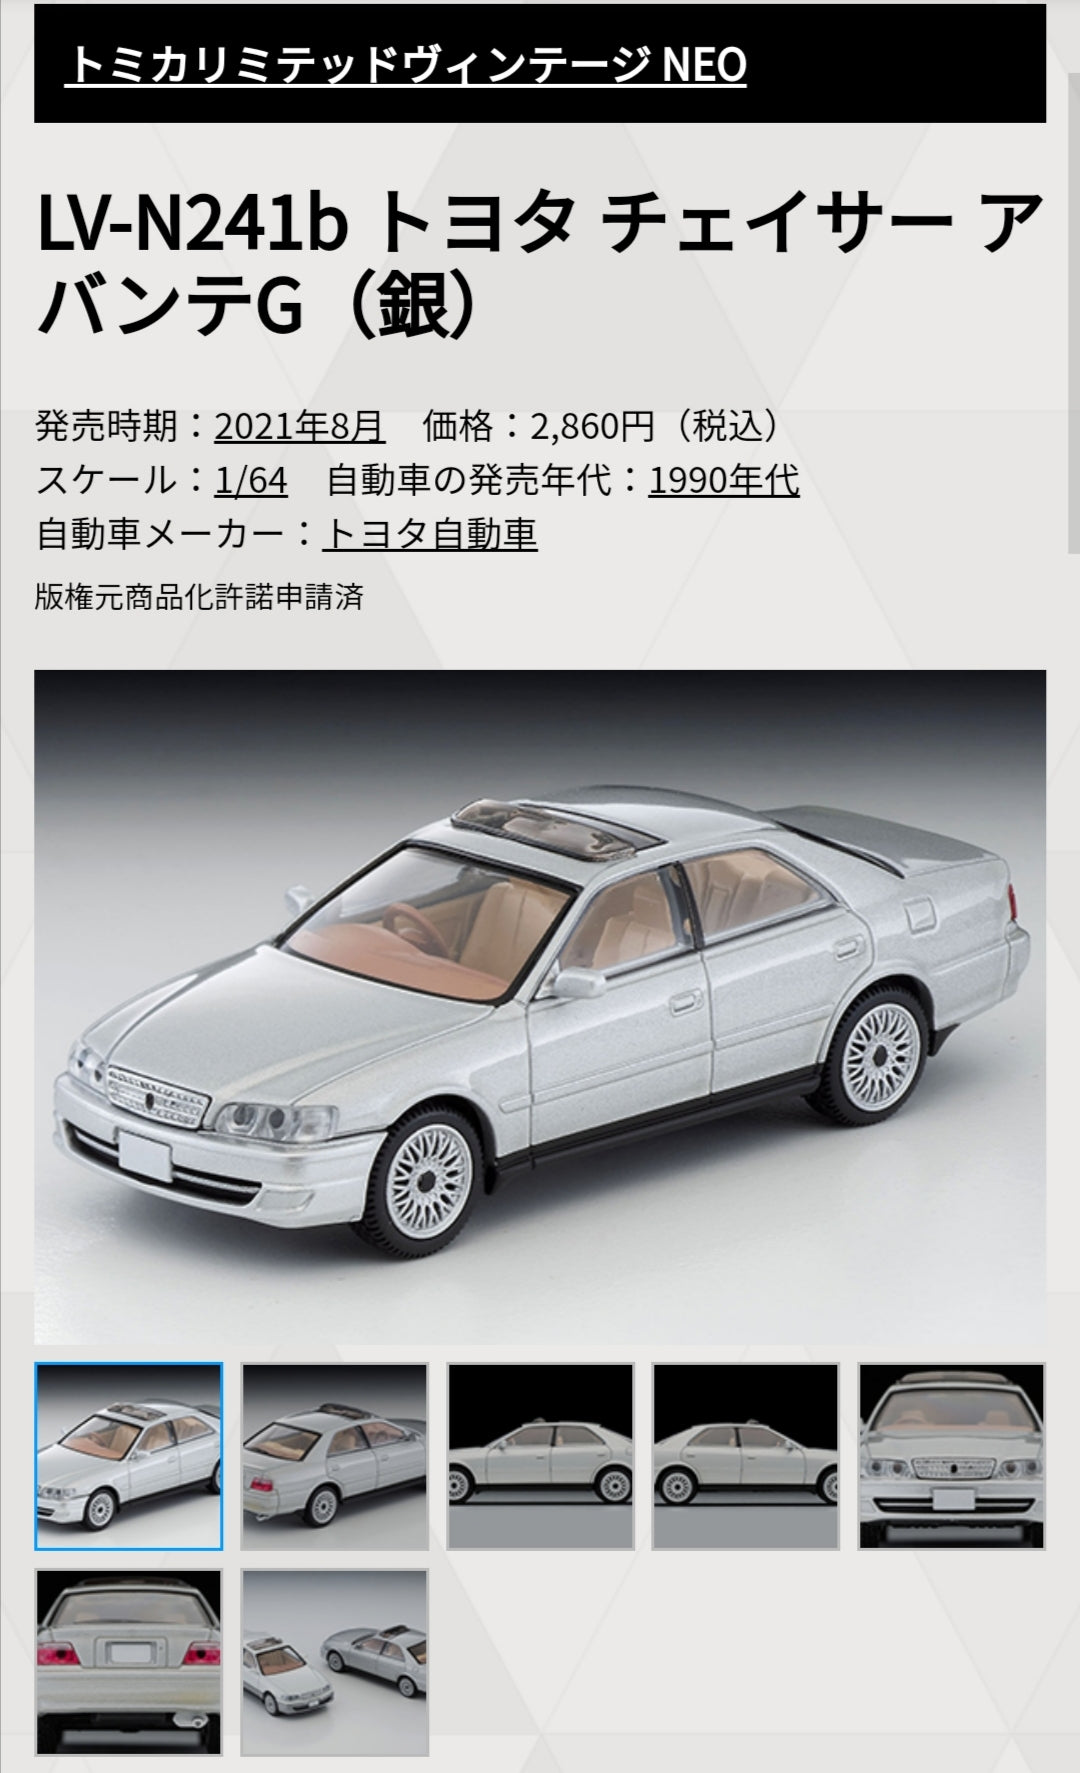 Tomica Limited Vintage Neo LV-N241b Toyota Chaser Avante G (silver)